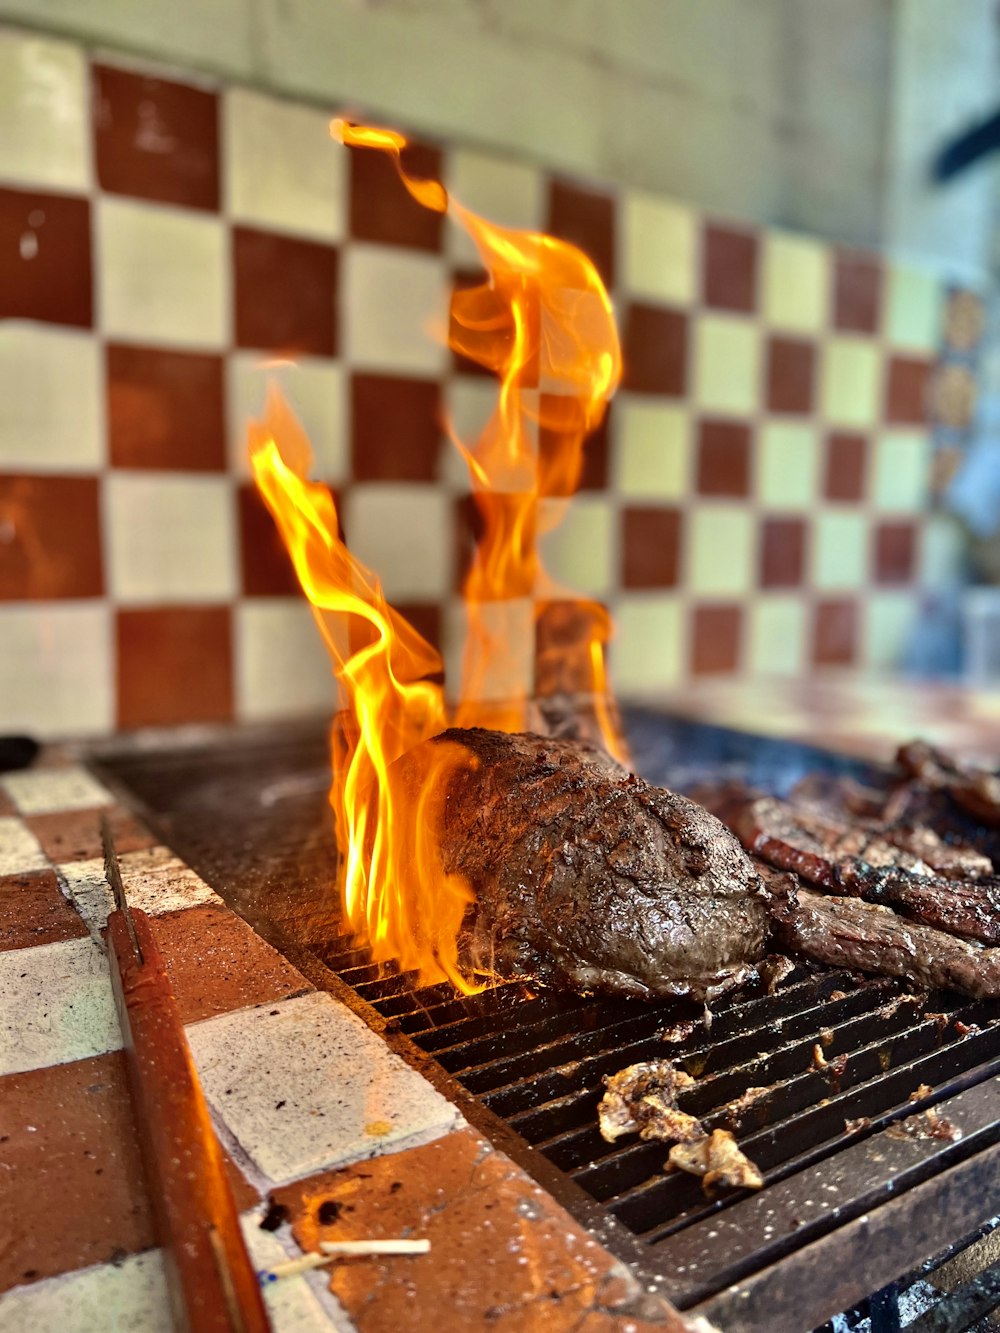 A close up of a grill with meat on it photo – Free Yautepec de zaragoza  Image on Unsplash